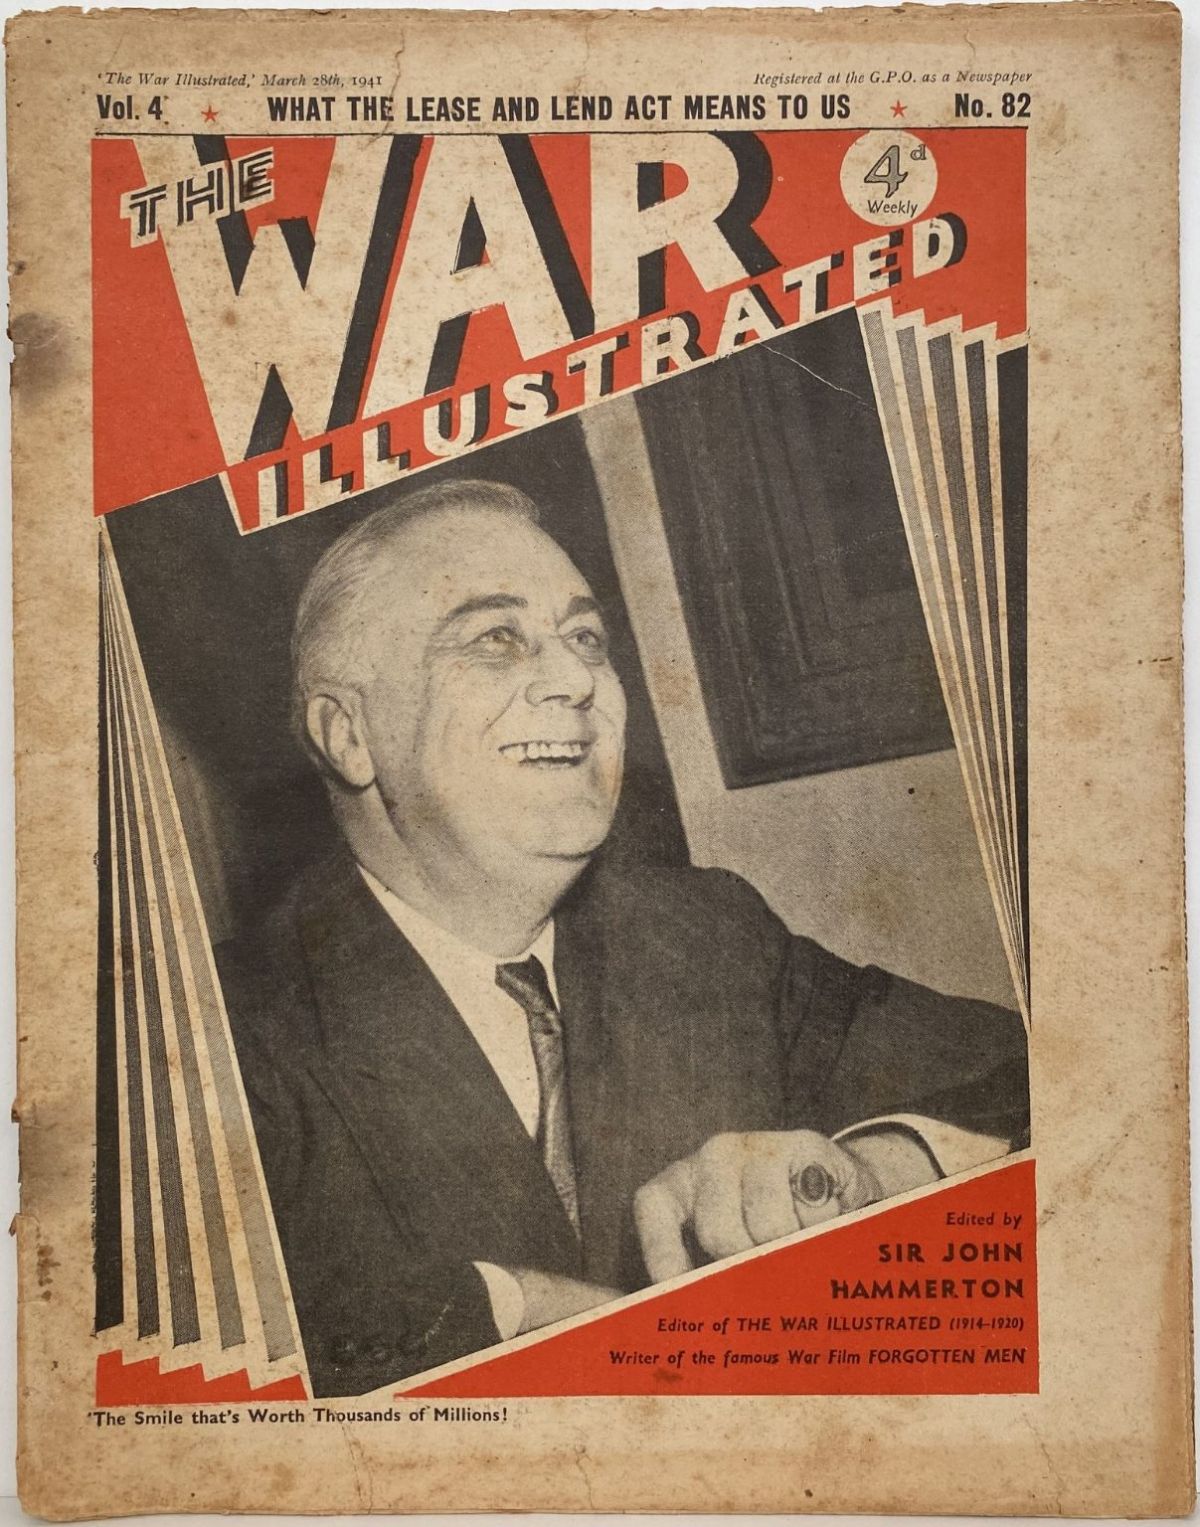 THE WAR ILLUSTRATED - Vol 4, No 82, 28th March 1941